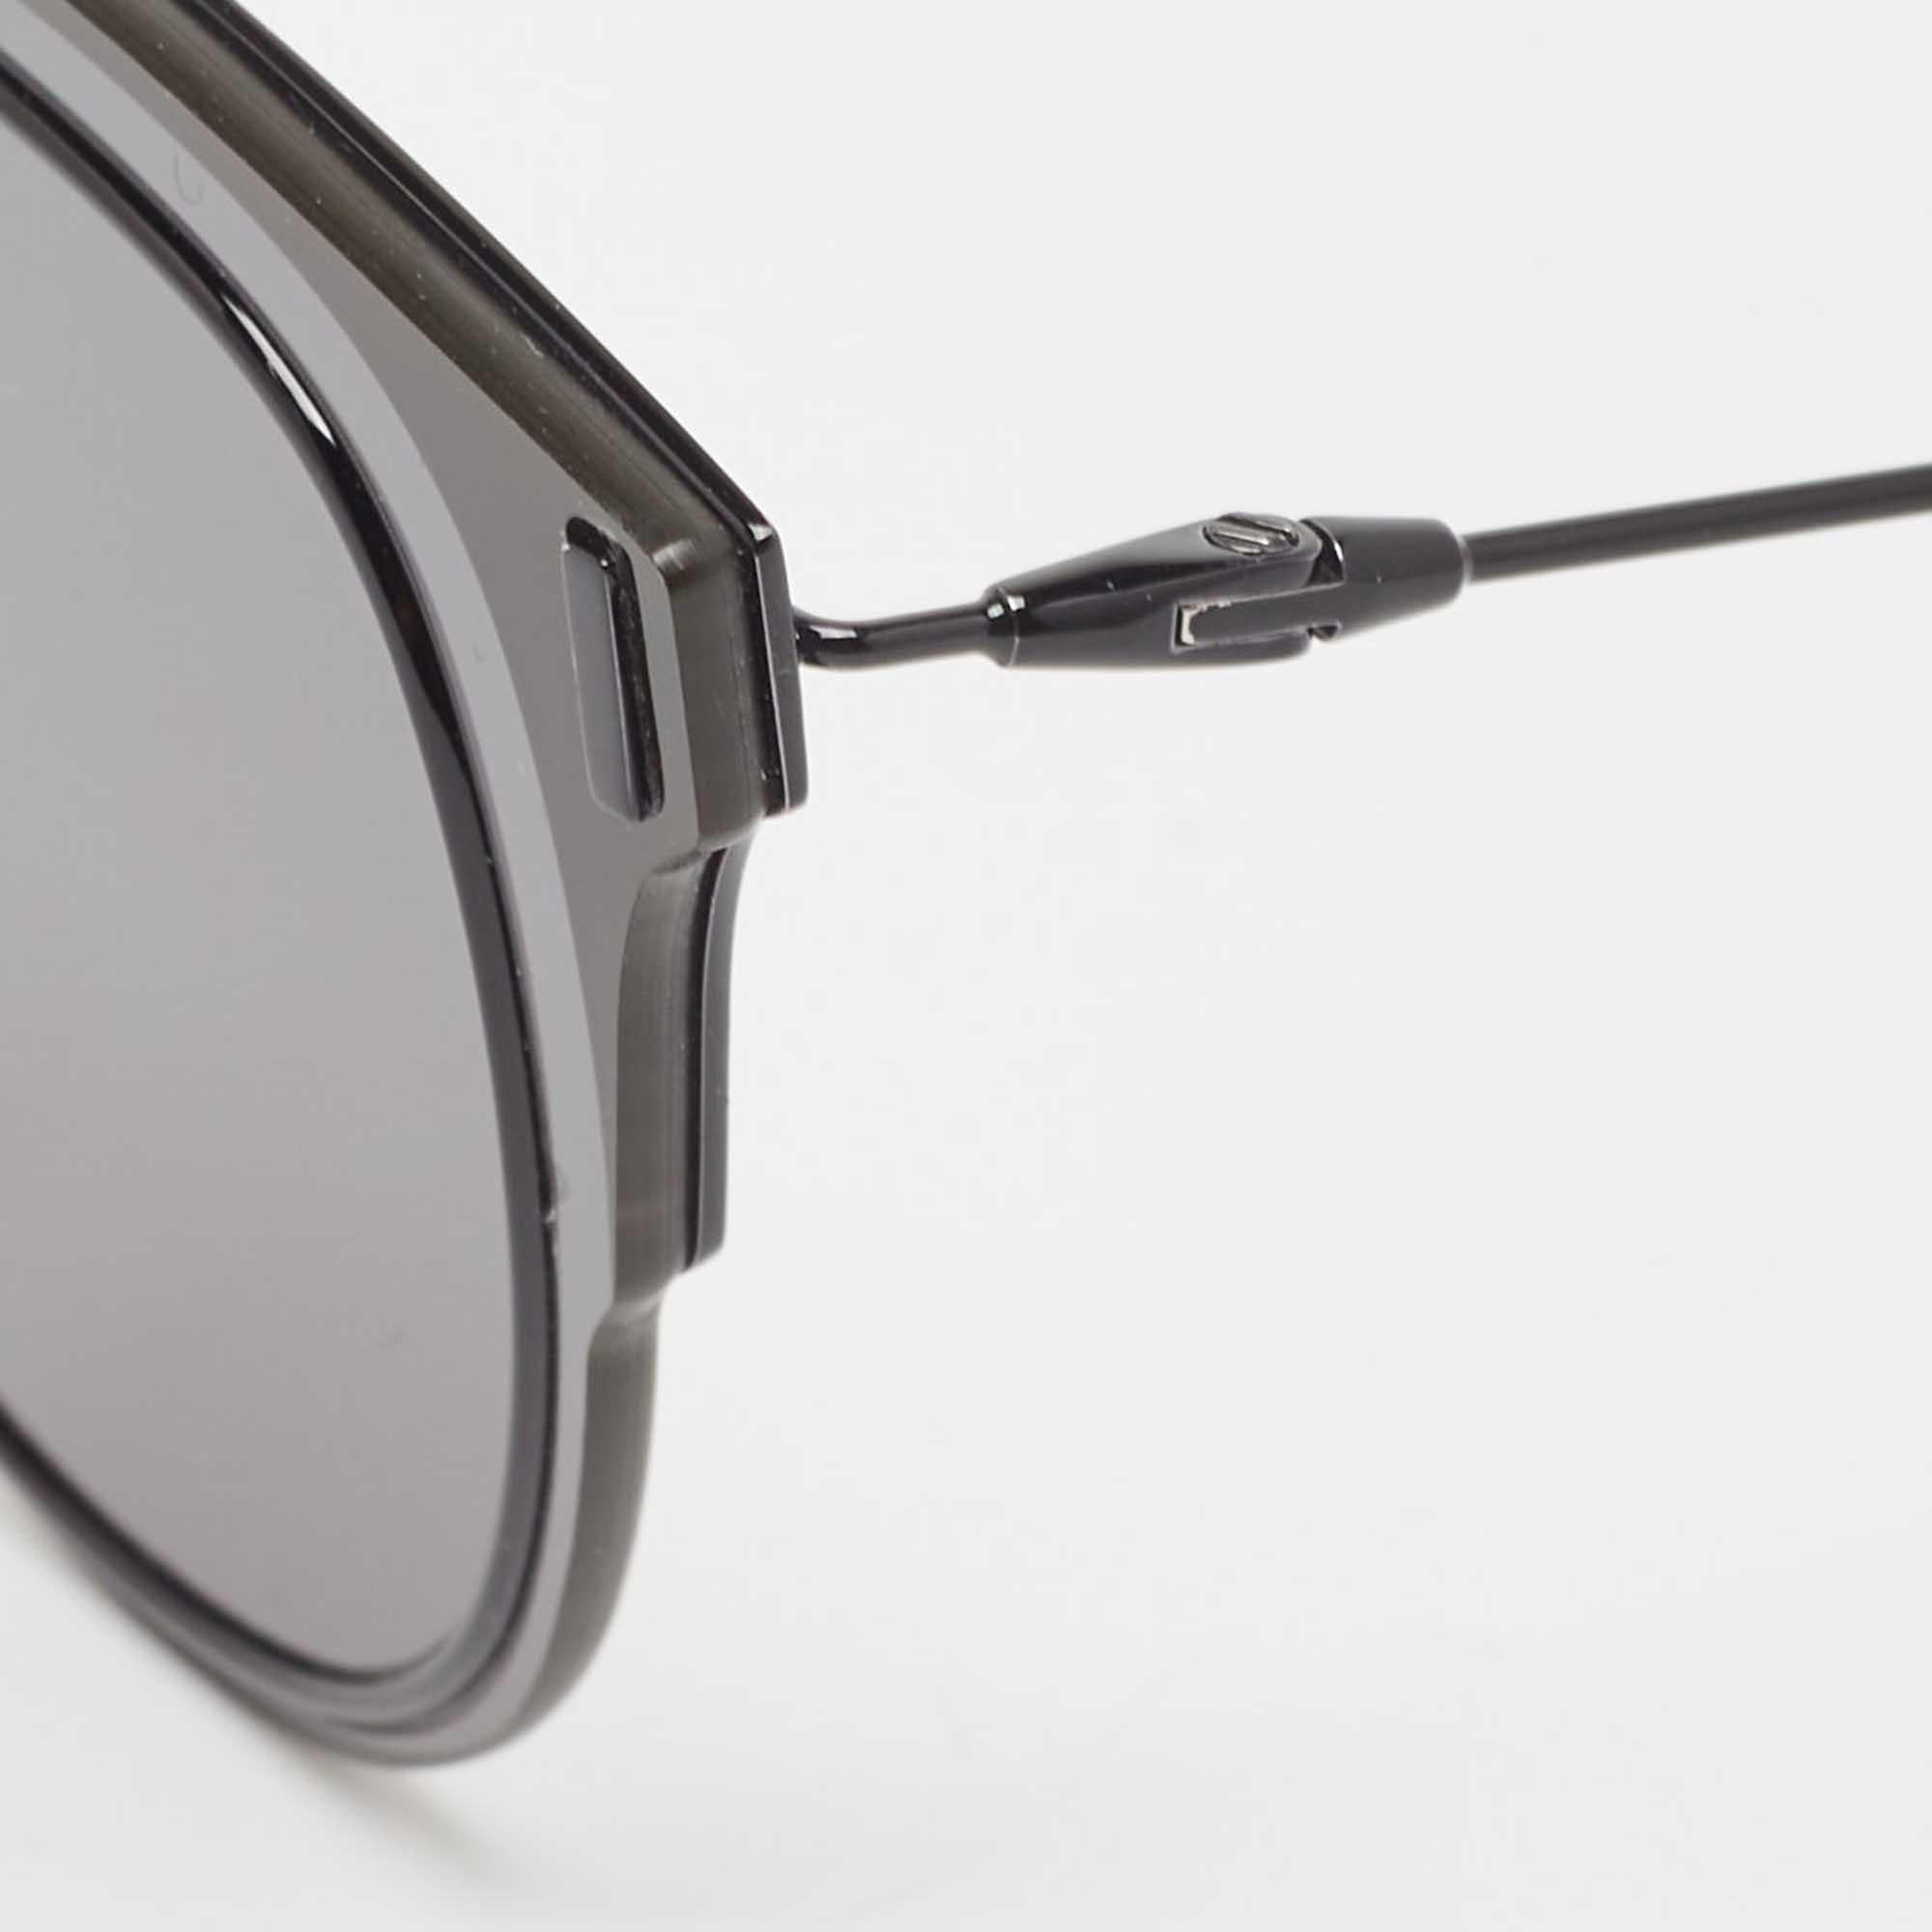 Embrace sunny days in full style with the help of this pair of Dior Homme sunglasses. Created with expertise, the luxe sunglasses feature a well-designed frame and high-grade lenses that are equipped to protect your eyes.

